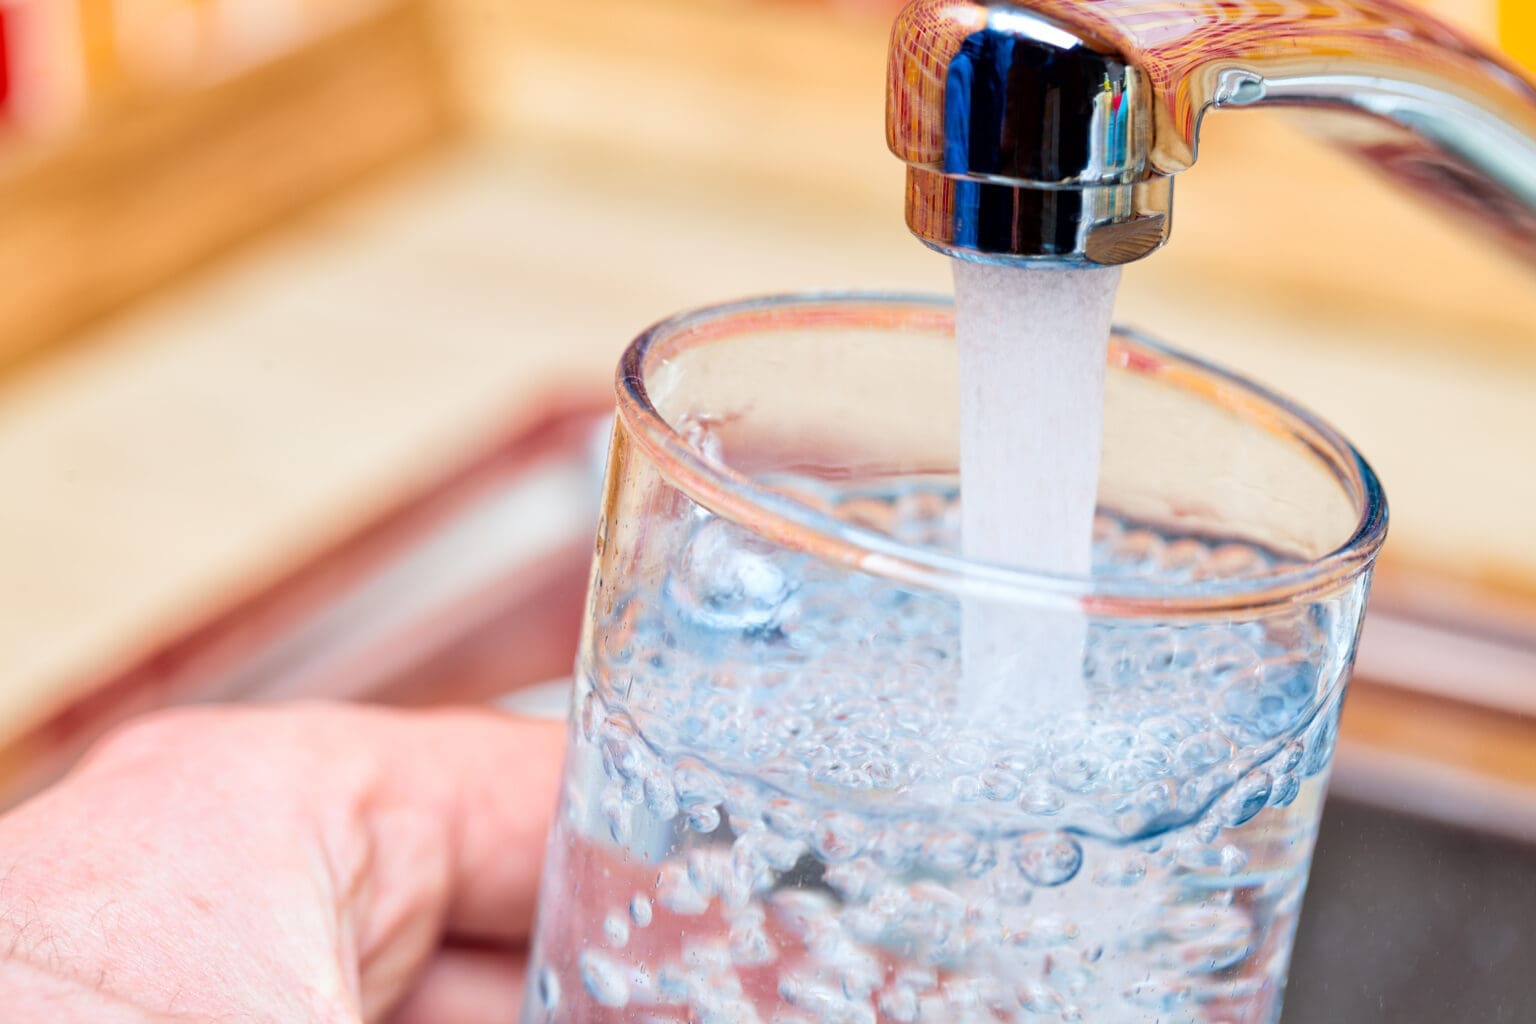 proposed lead and copper rule improvements to safeguard drinking water